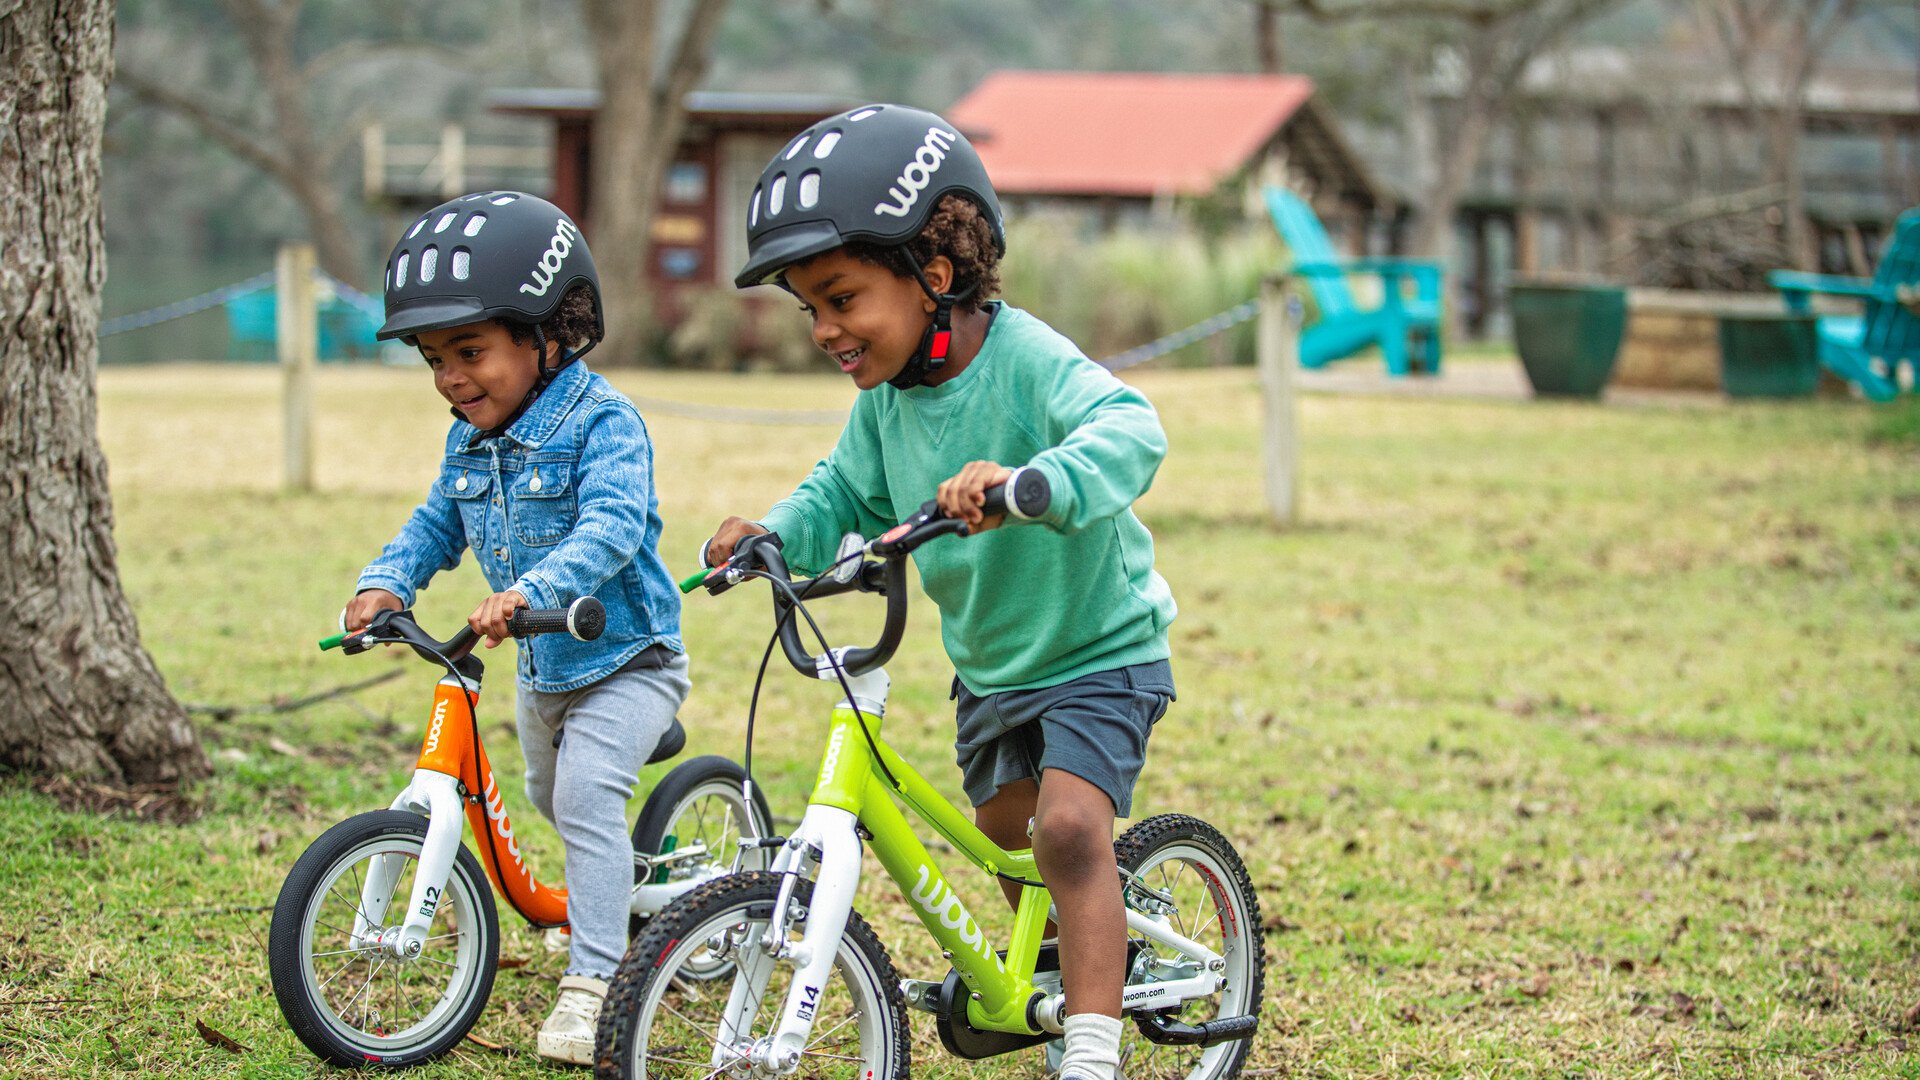 Two children in black woom helmets are riding their balance bikes across some grass.